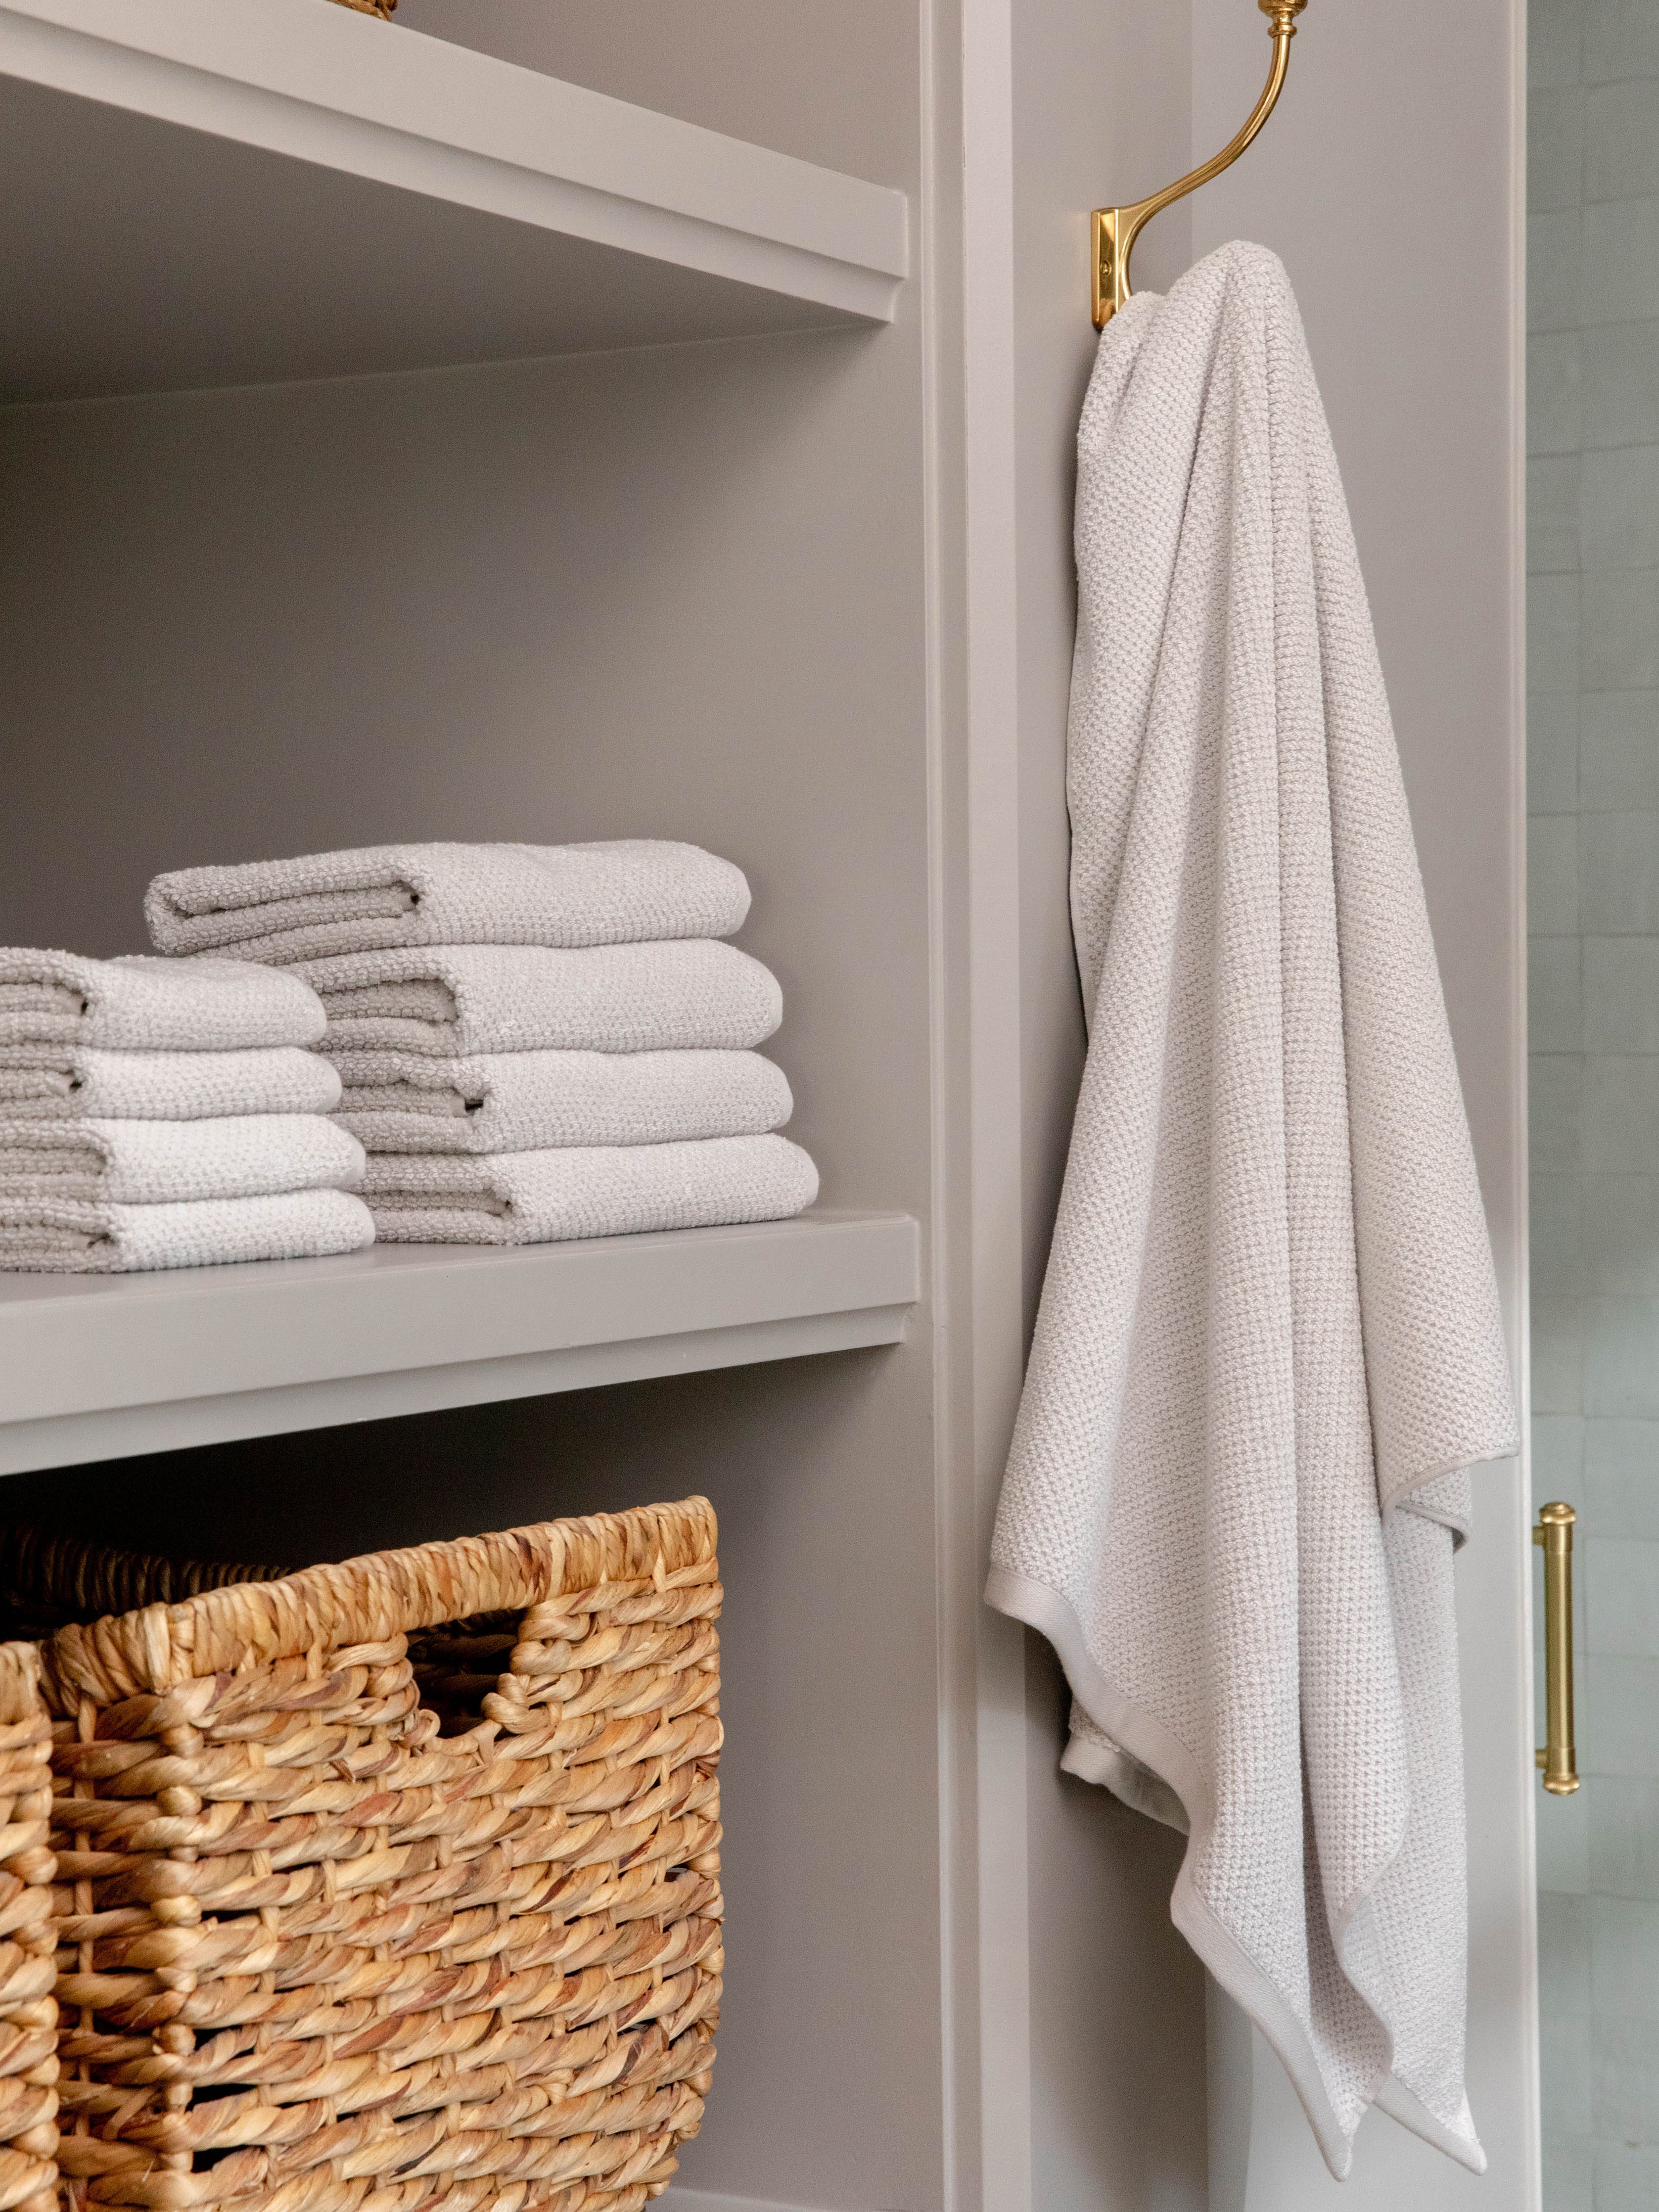 Nantucket Bath Sheets in the color Heathered Light Grey. Photo of Nantucket Bath Sheets taken as Nantucket hand towels, wash clothes, and bath towels are neatly placed on shelves in a bathroom. |Color:Heathered Light Grey